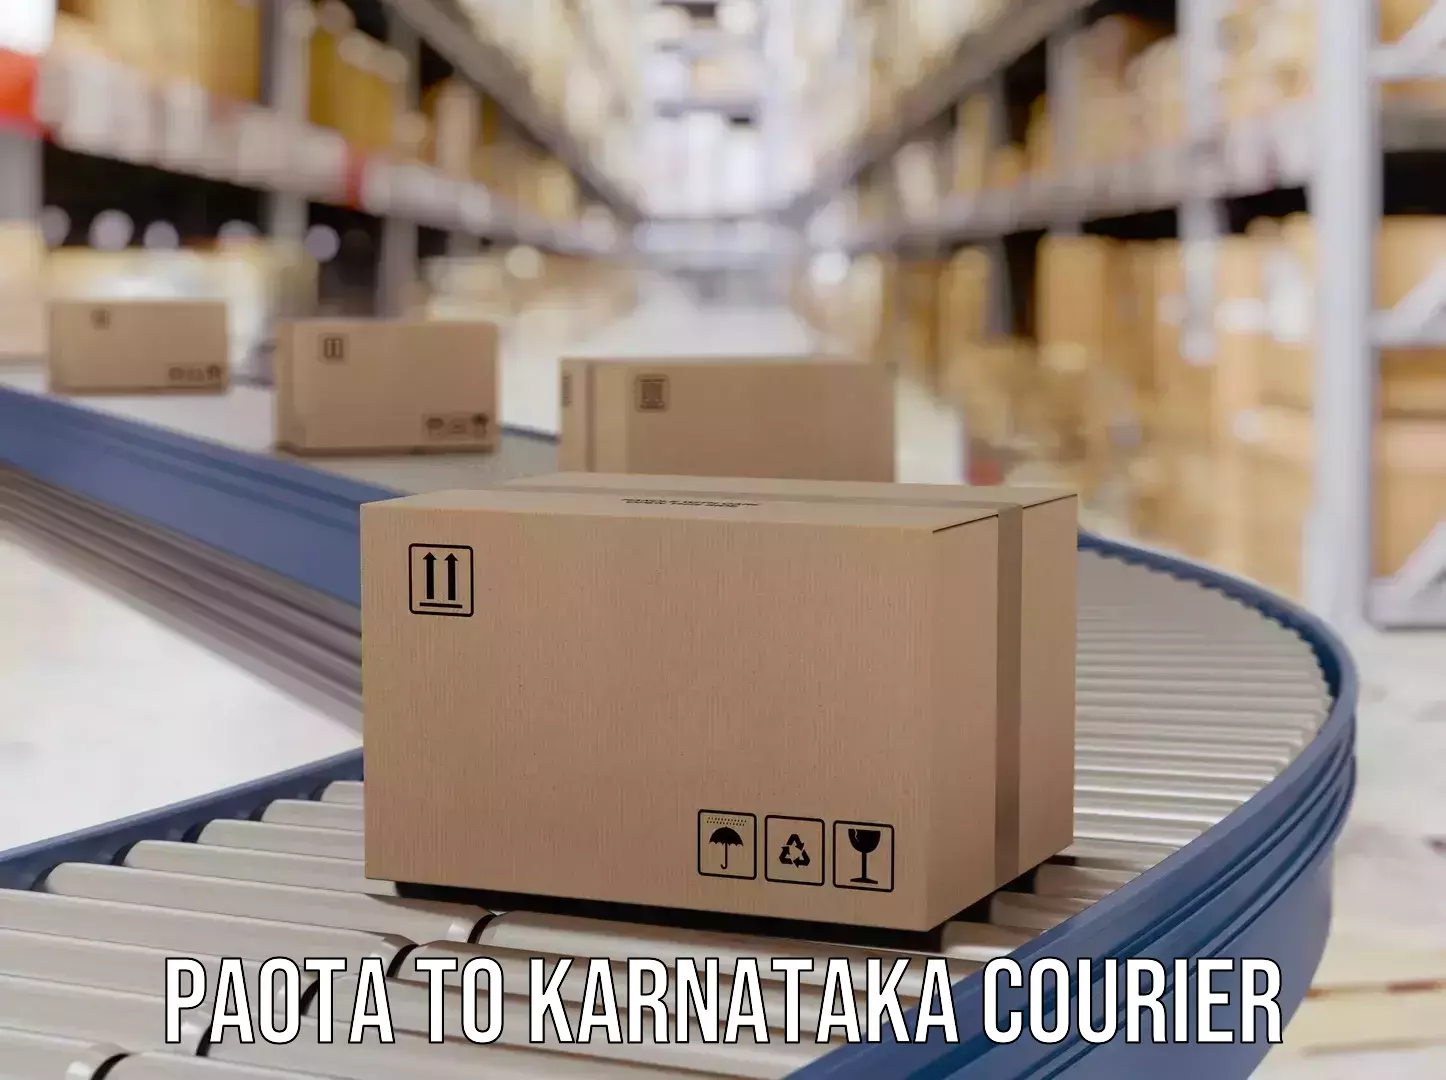 Online package tracking Paota to Pedapudi